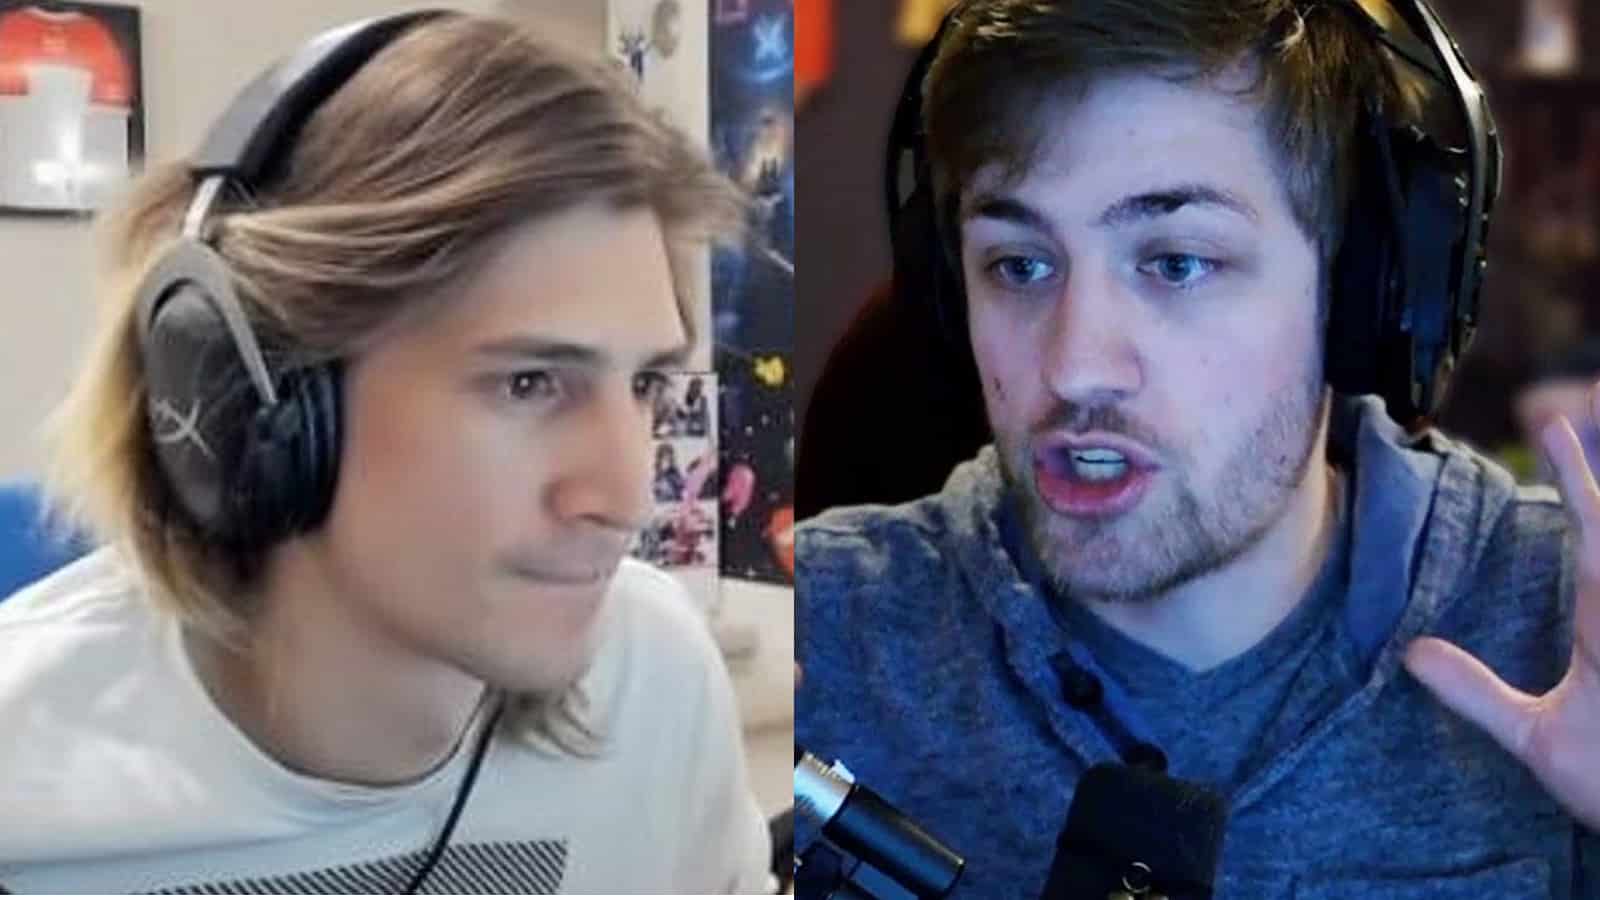 xqc and sodapoppin